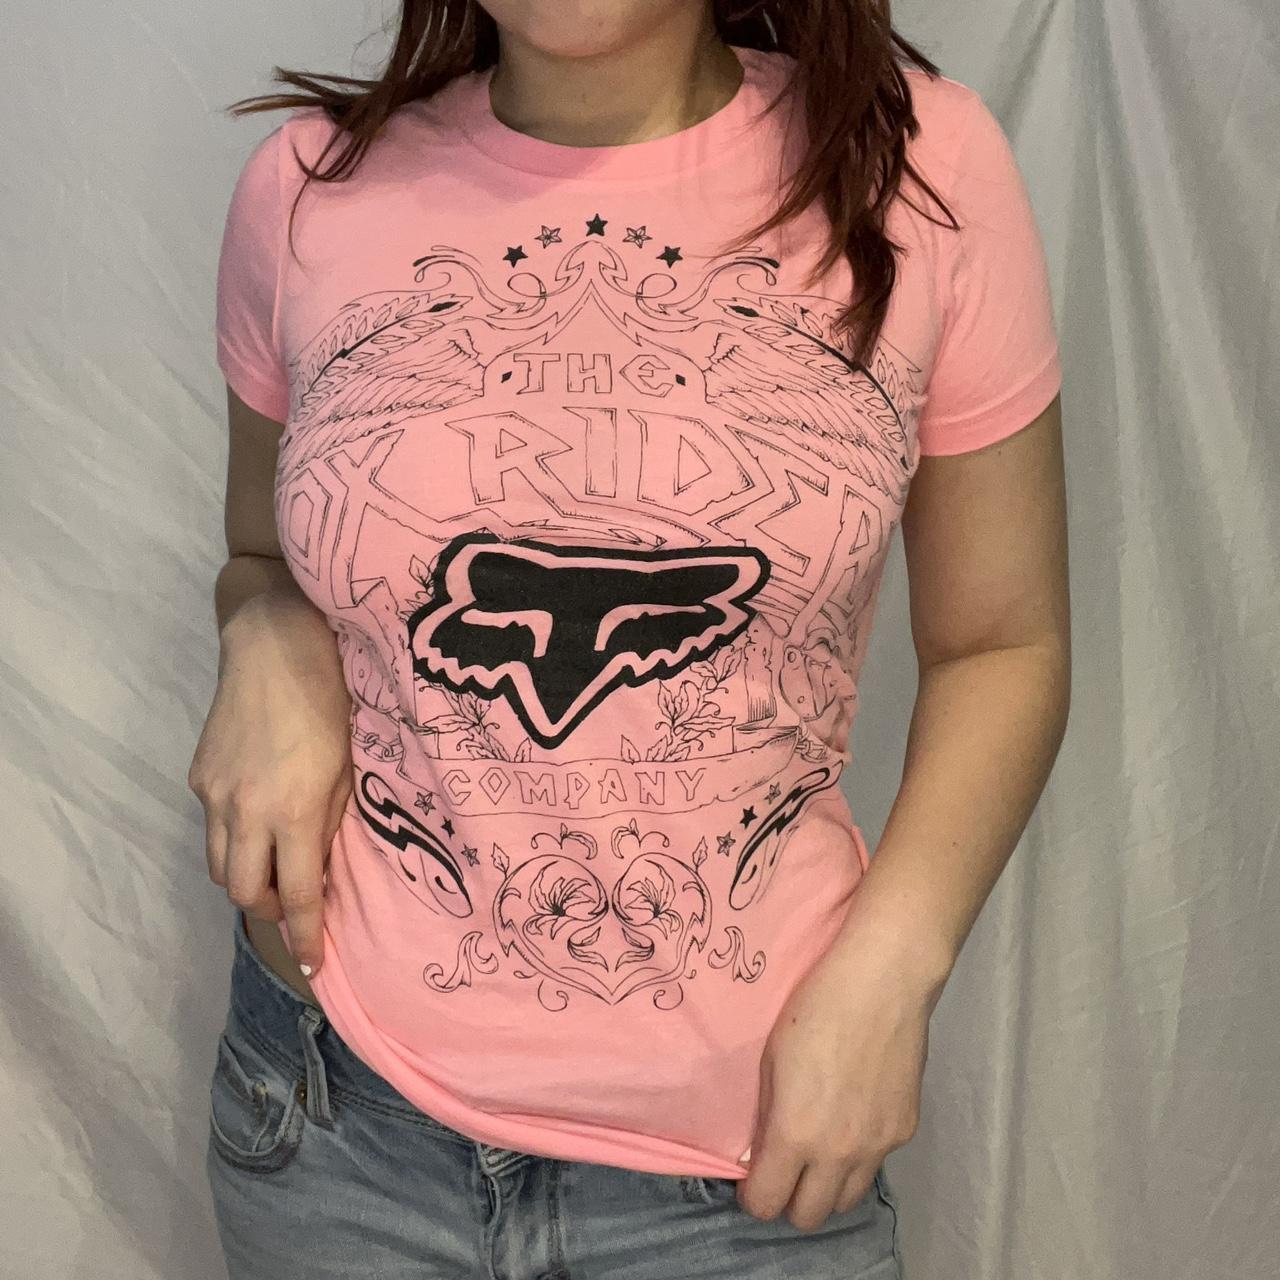 Women's Pink and Black T-shirt